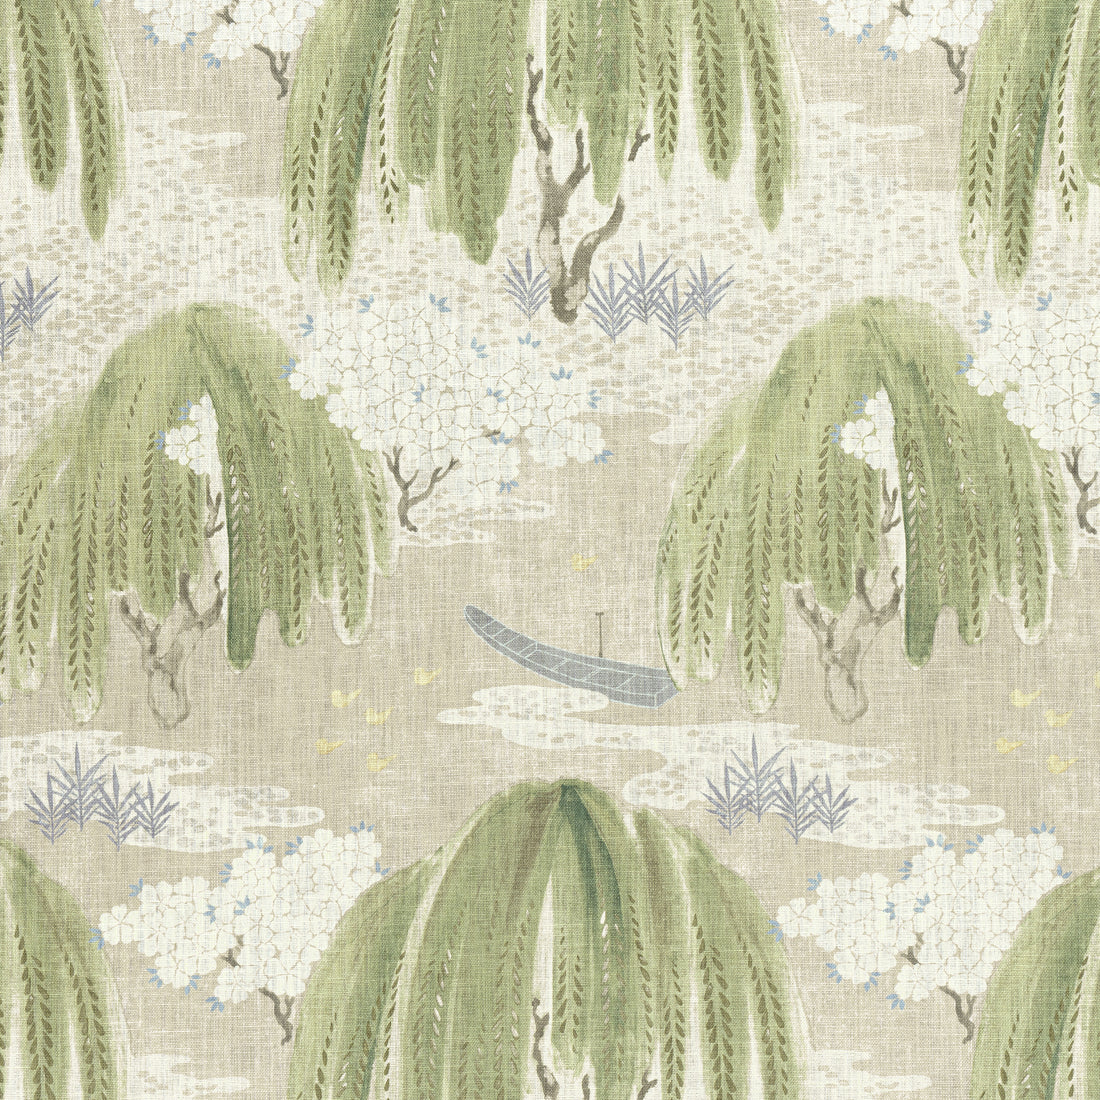 Willow Tree fabric in beige color - pattern number AF23106 - by Anna French in the Willow Tree collection